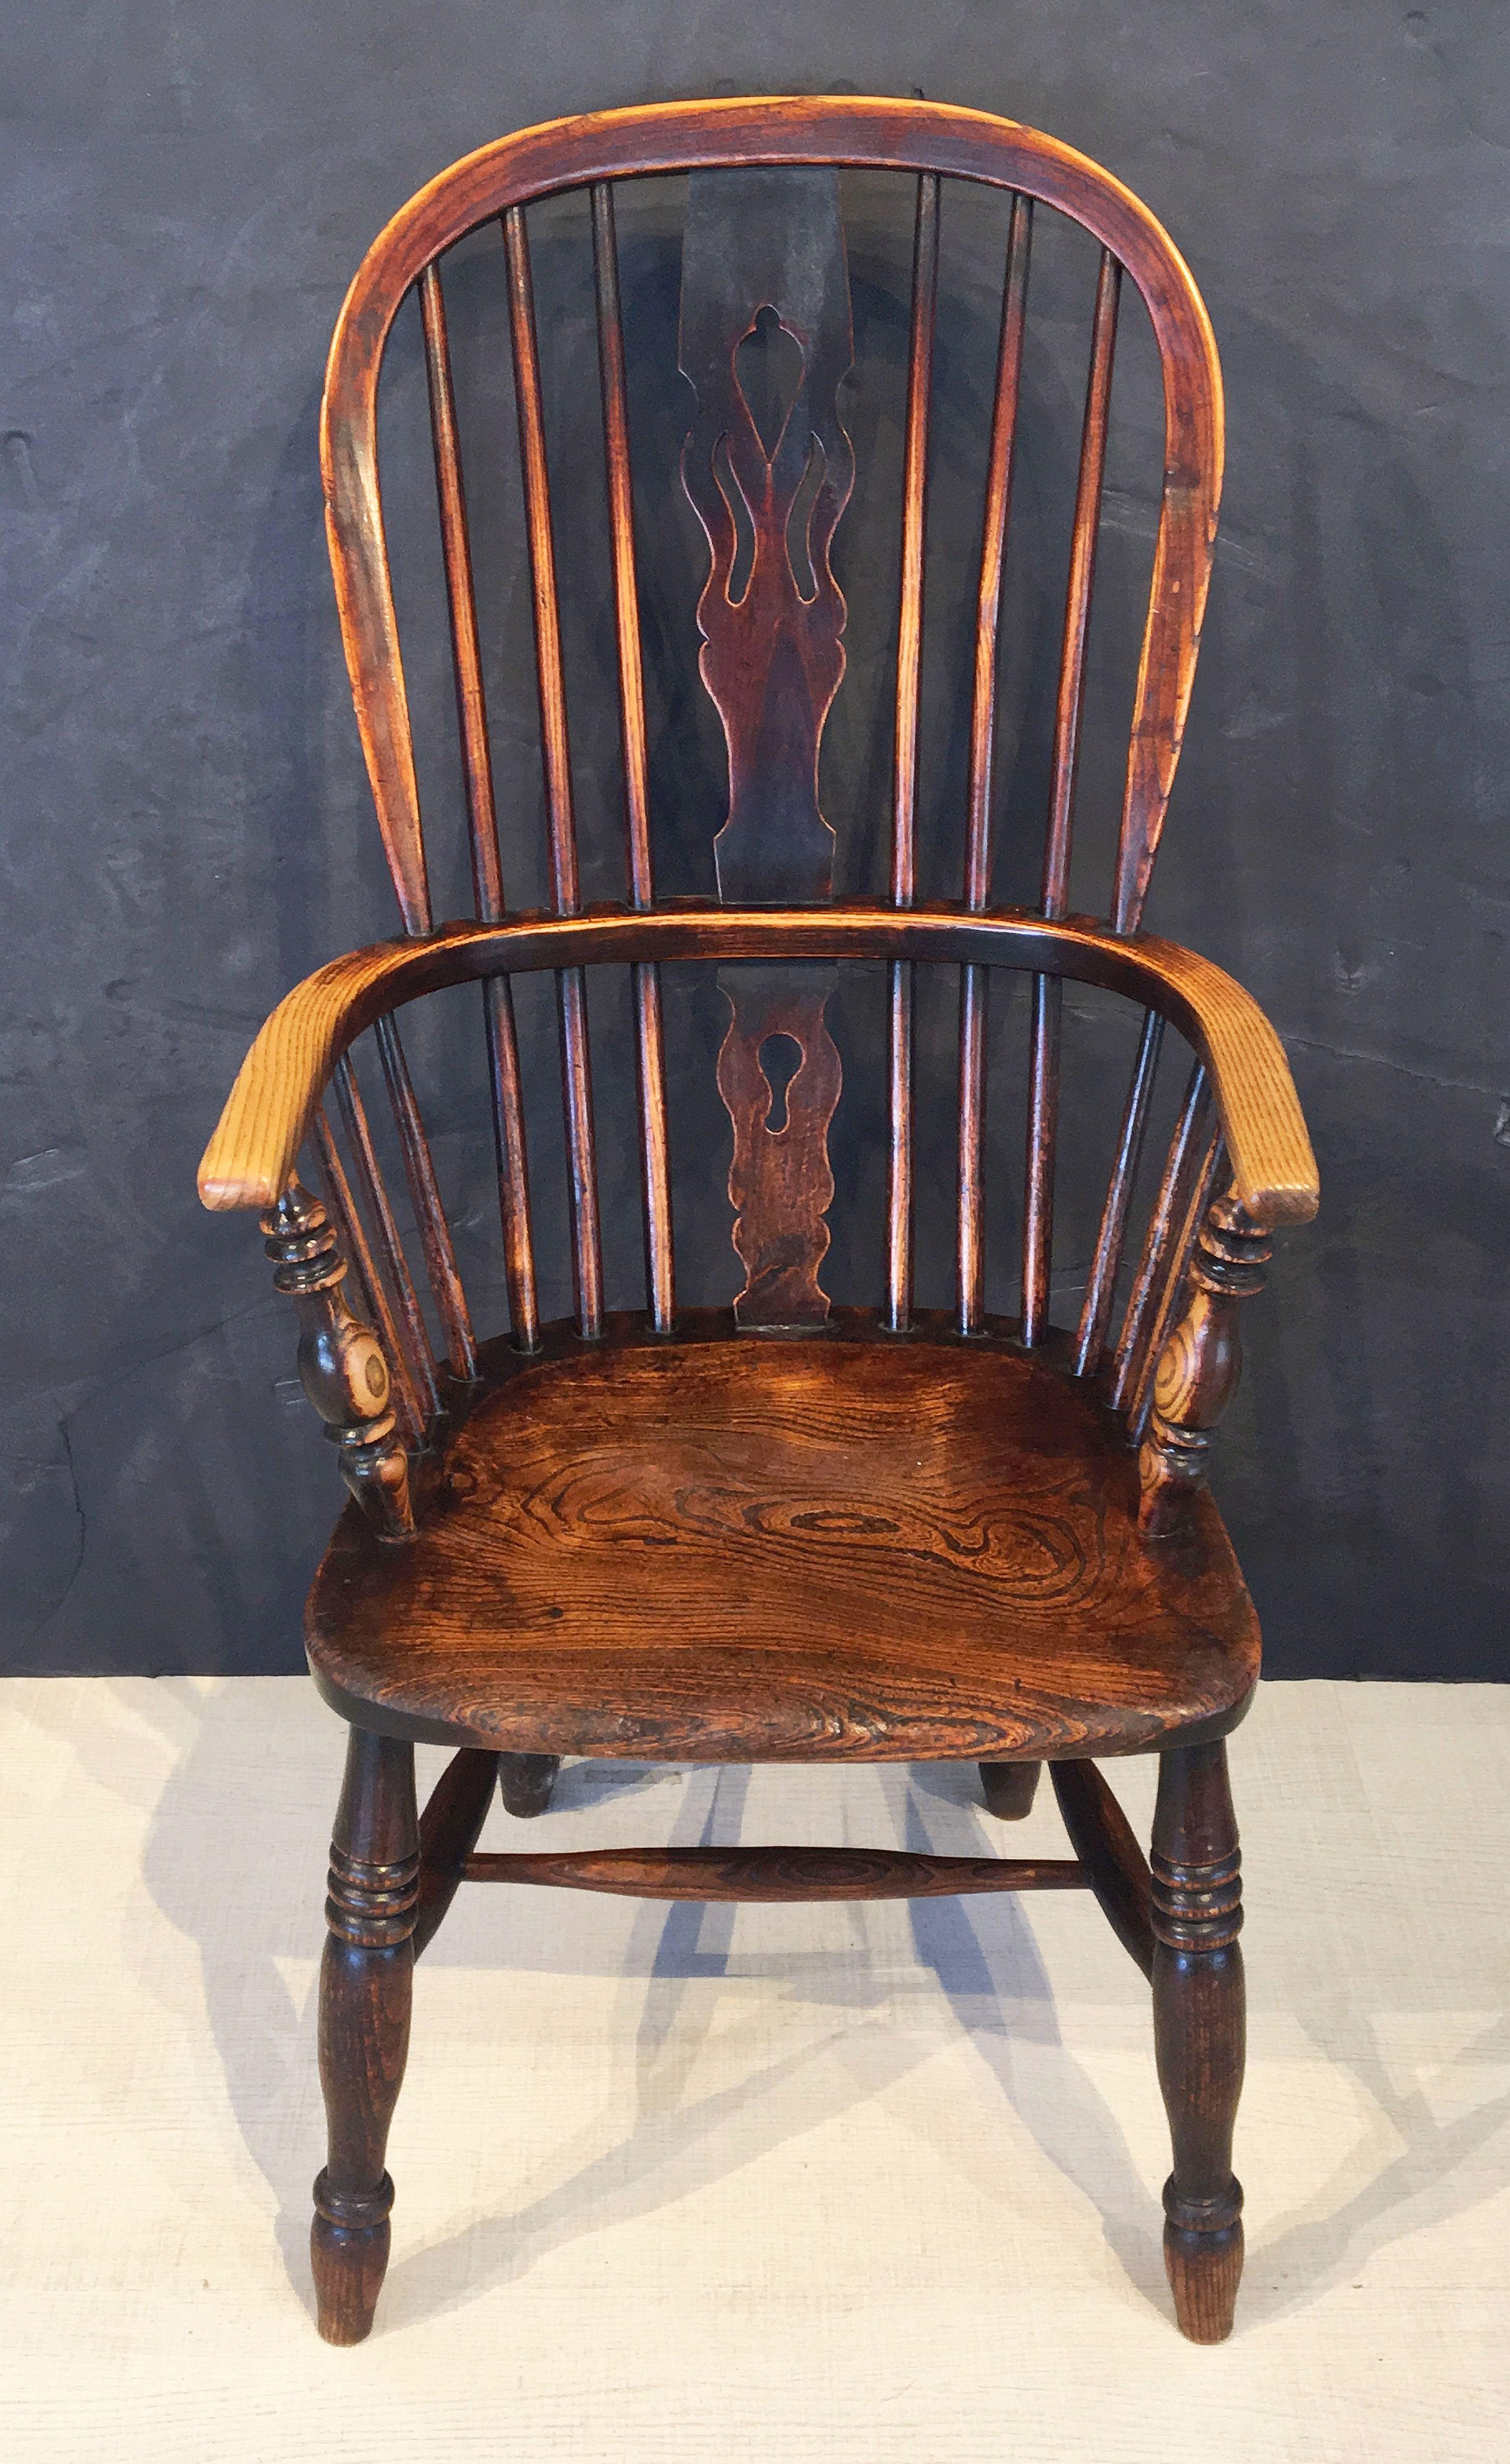 A handsome large English Windsor high back chair of elm and ash woods, featuring a bowed top rail and pierced splat and spindle back, with solid seat on turned stretcher.